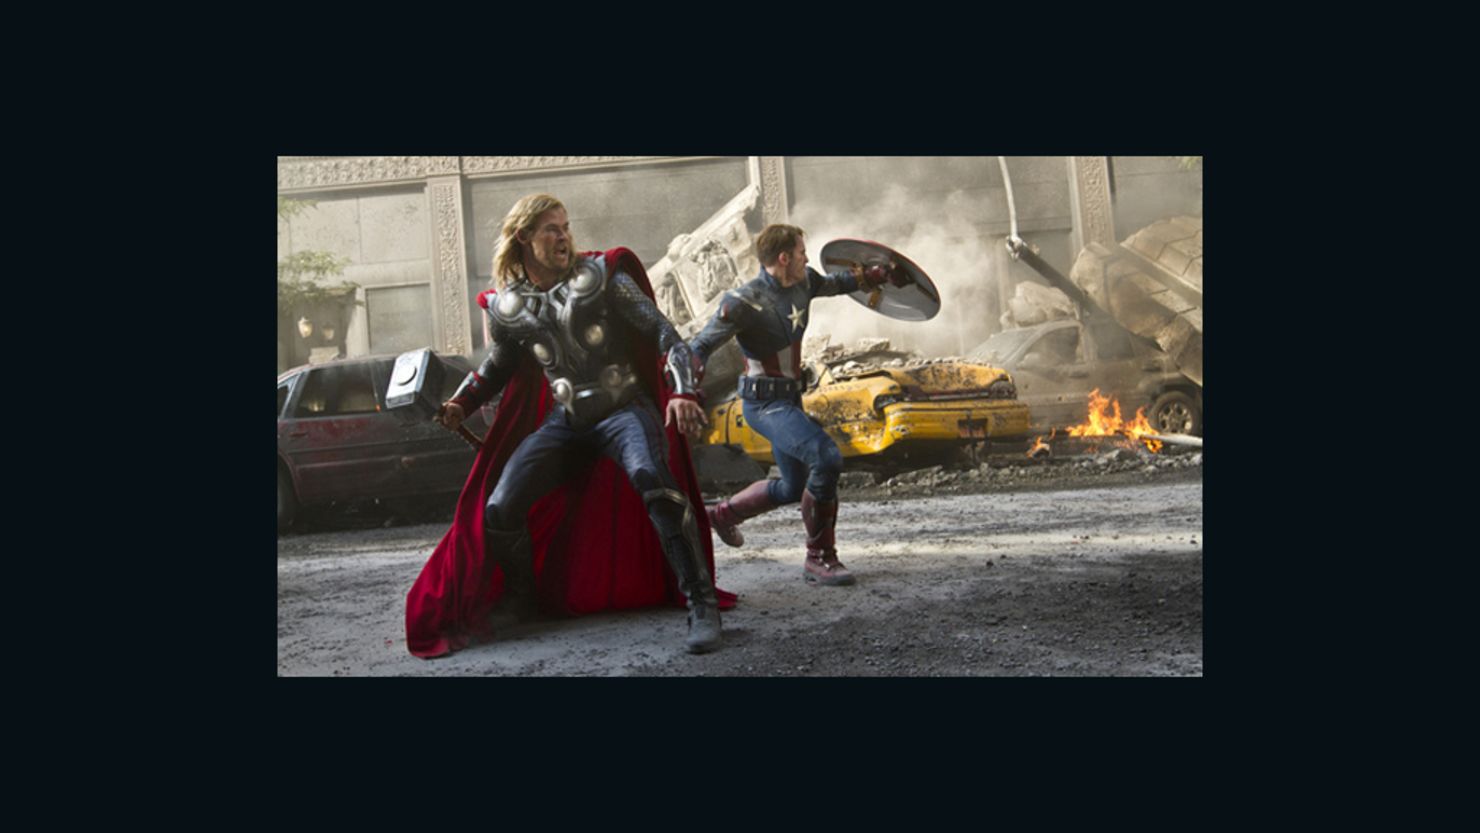 Thor and Captain America fight to save the planet in The Avengers, a tremendous box office success.